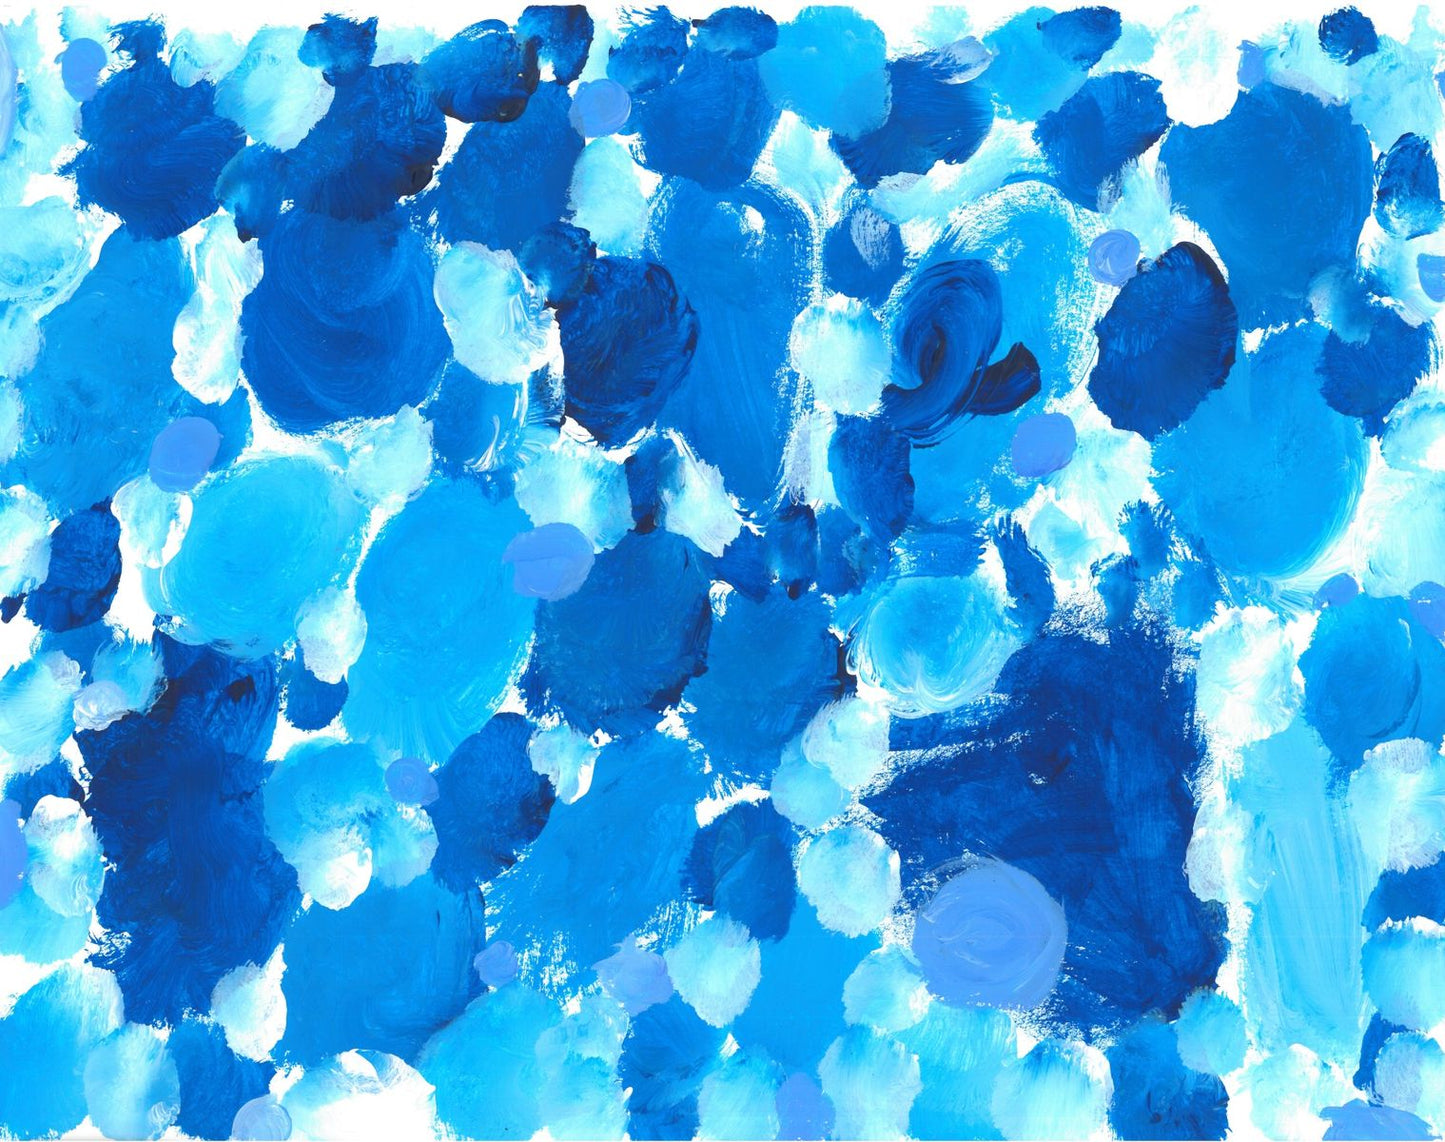 Splotches of light blue, medium blue, and dark blue on a white background give an impression of bubbles.